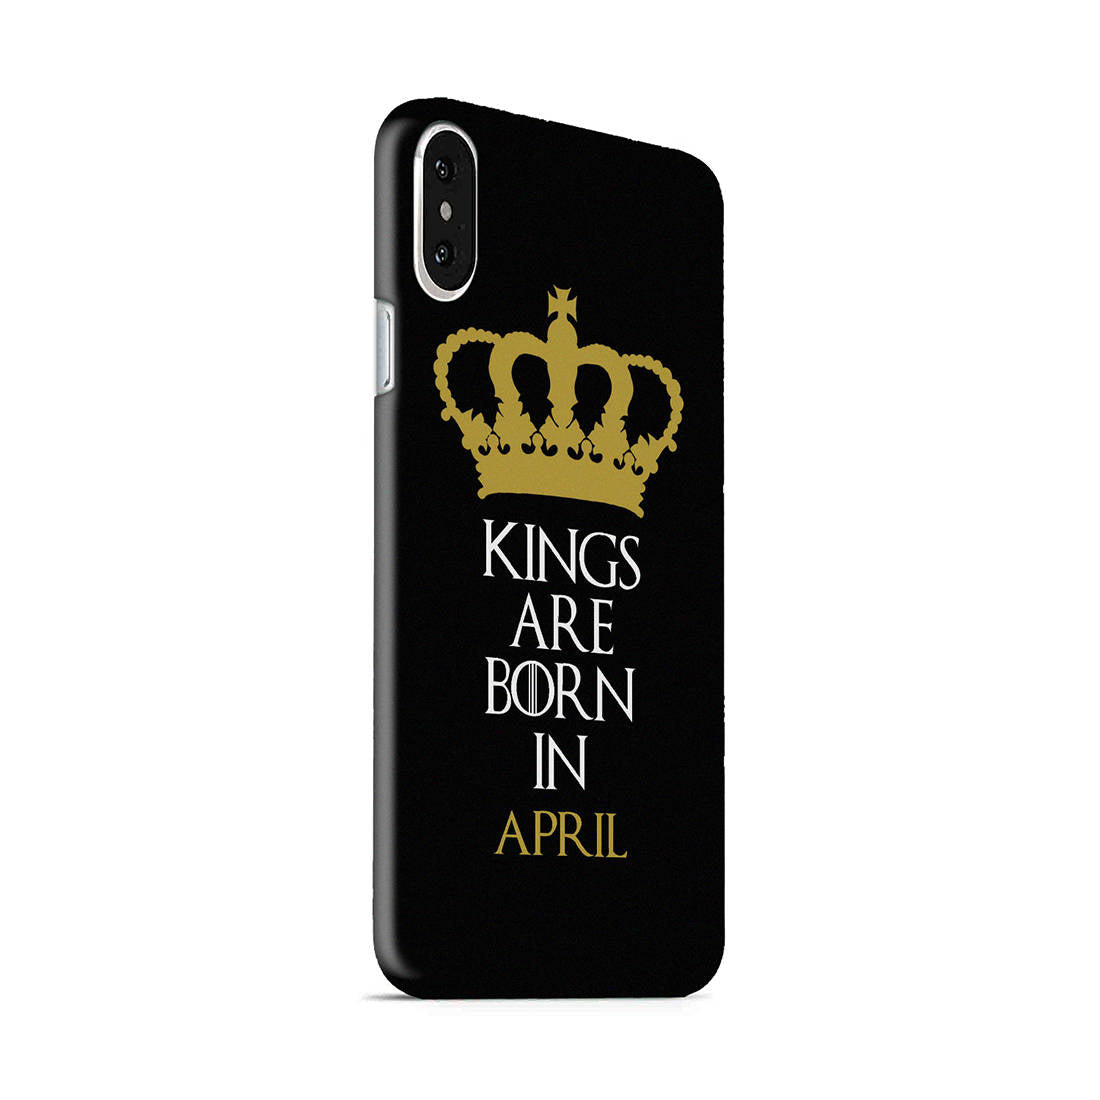 Kings April iPhone X Mobile Cover Case - MADANYU